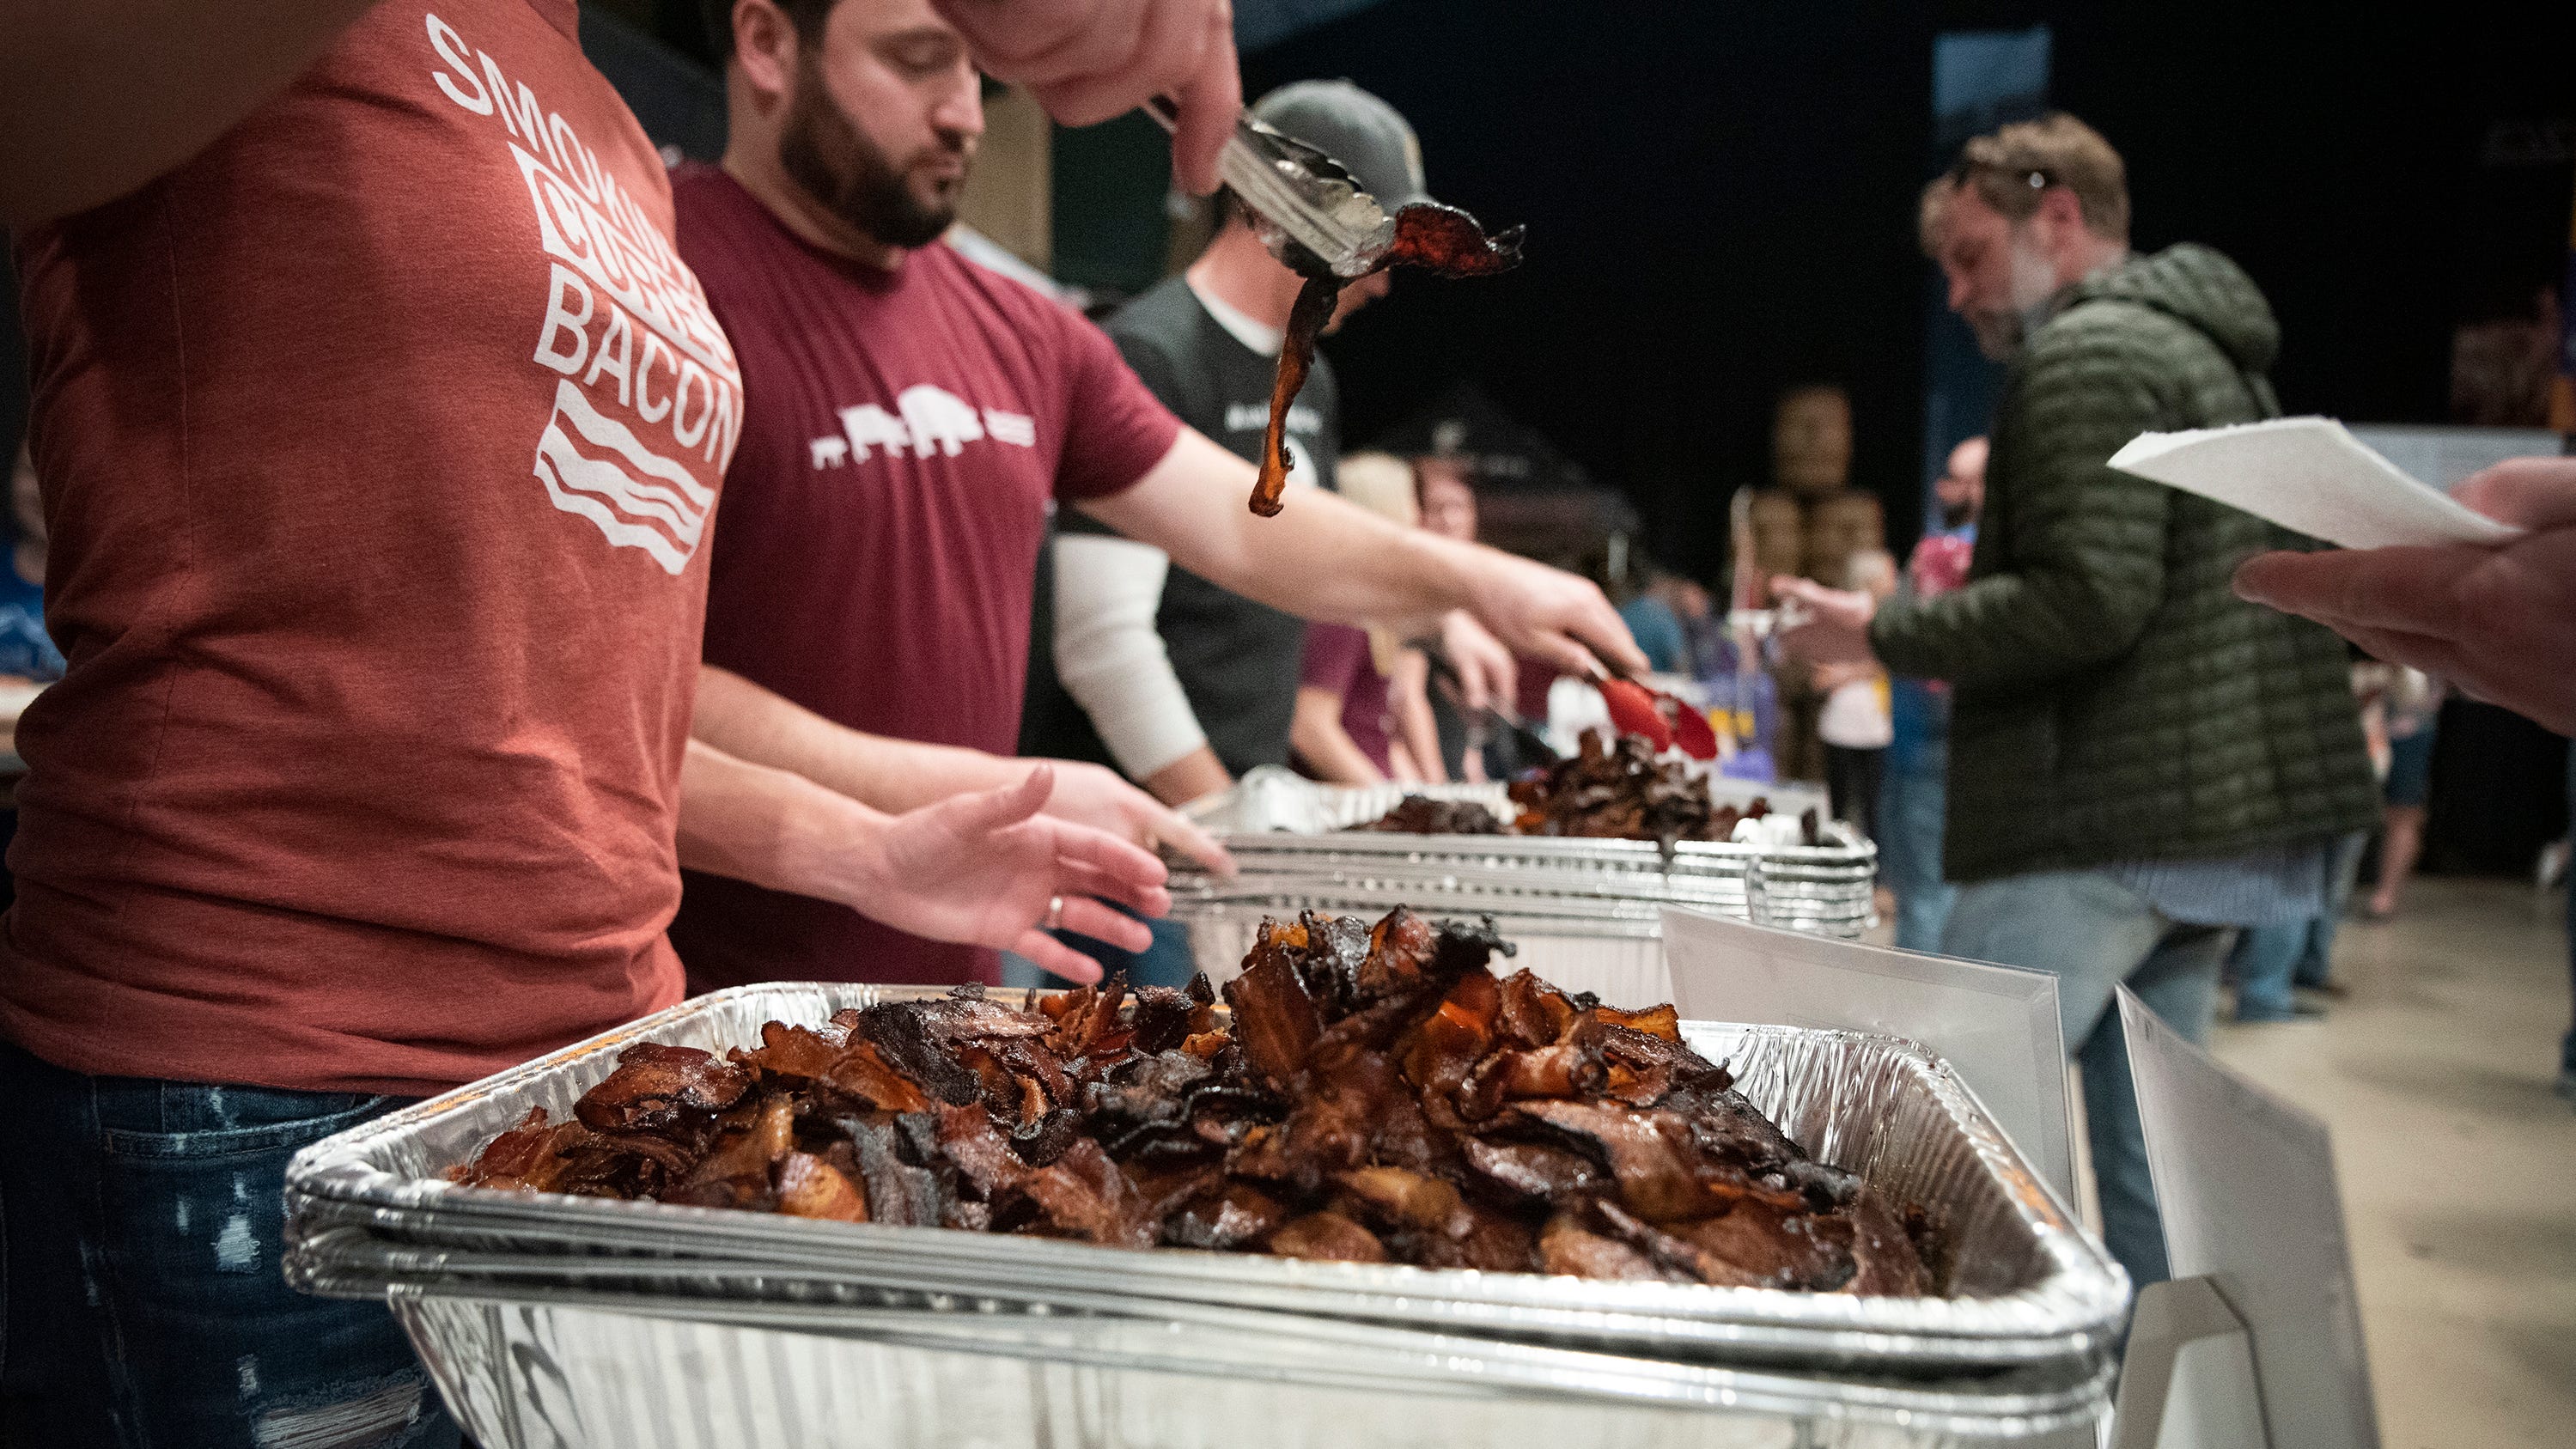 The Blue Ribbon Bacon Festival returns to Clive, Iowa for 2022